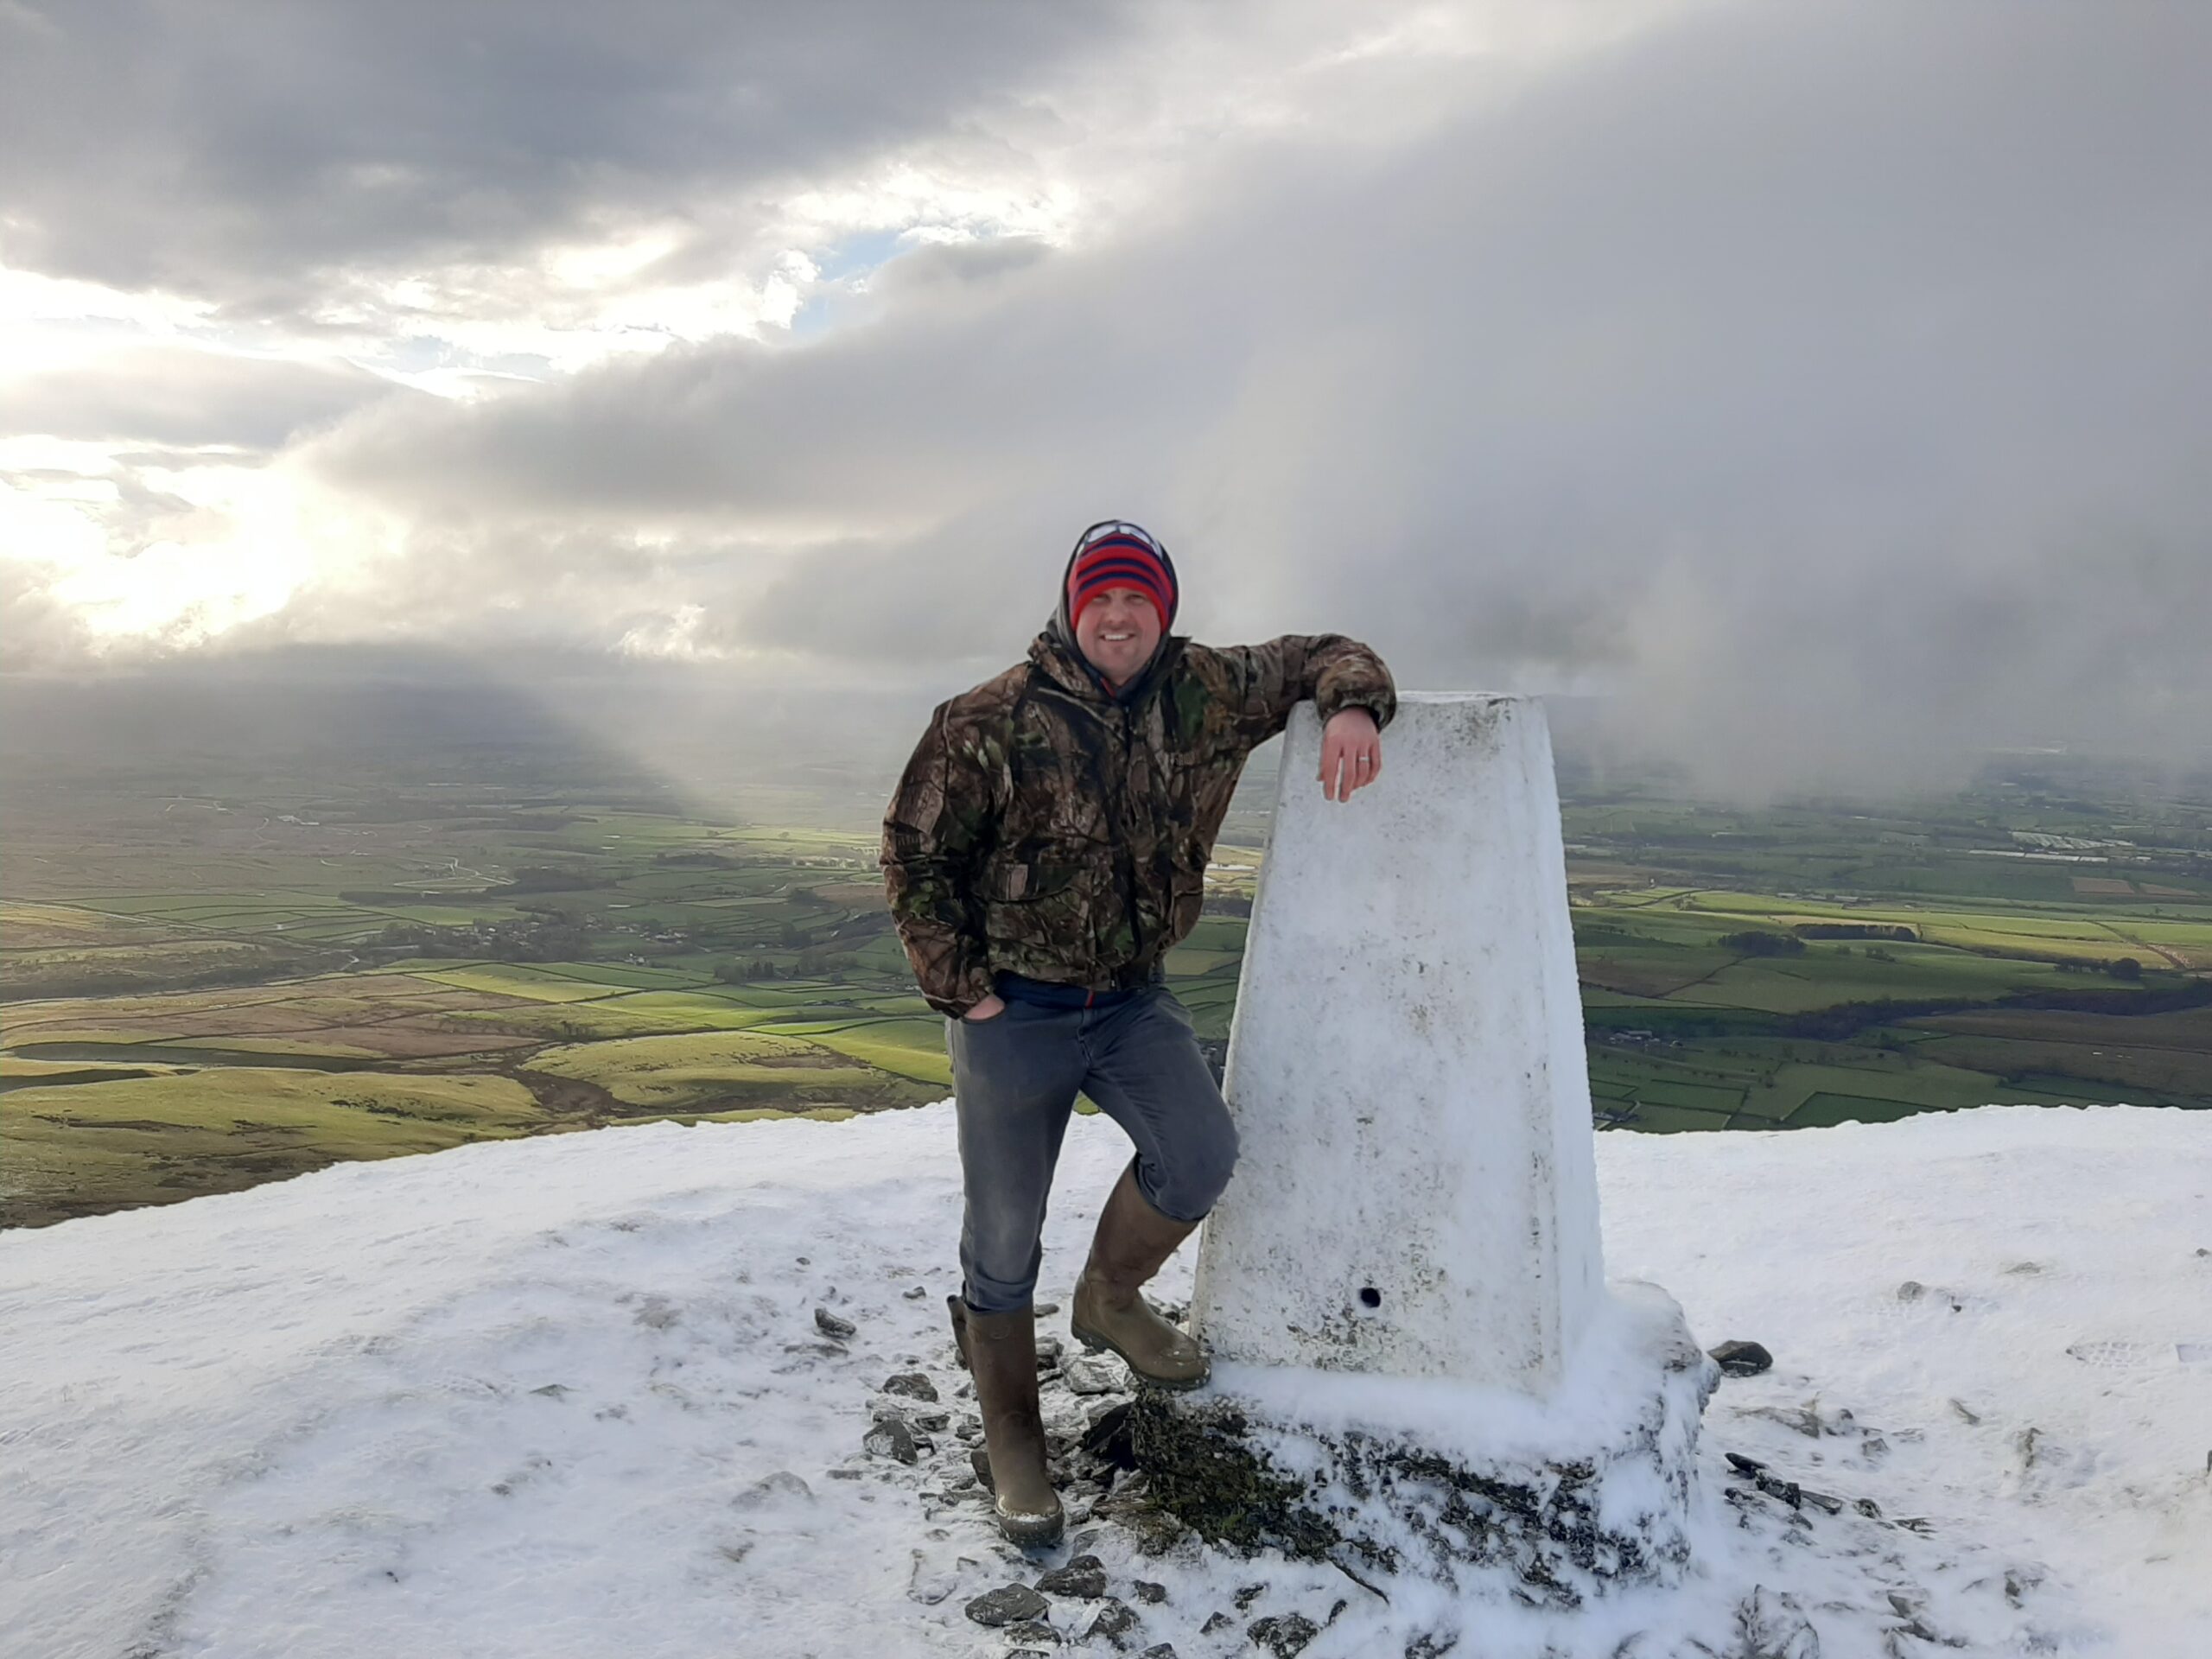 The summit of Murton Pike with views of the Eden Valley in background